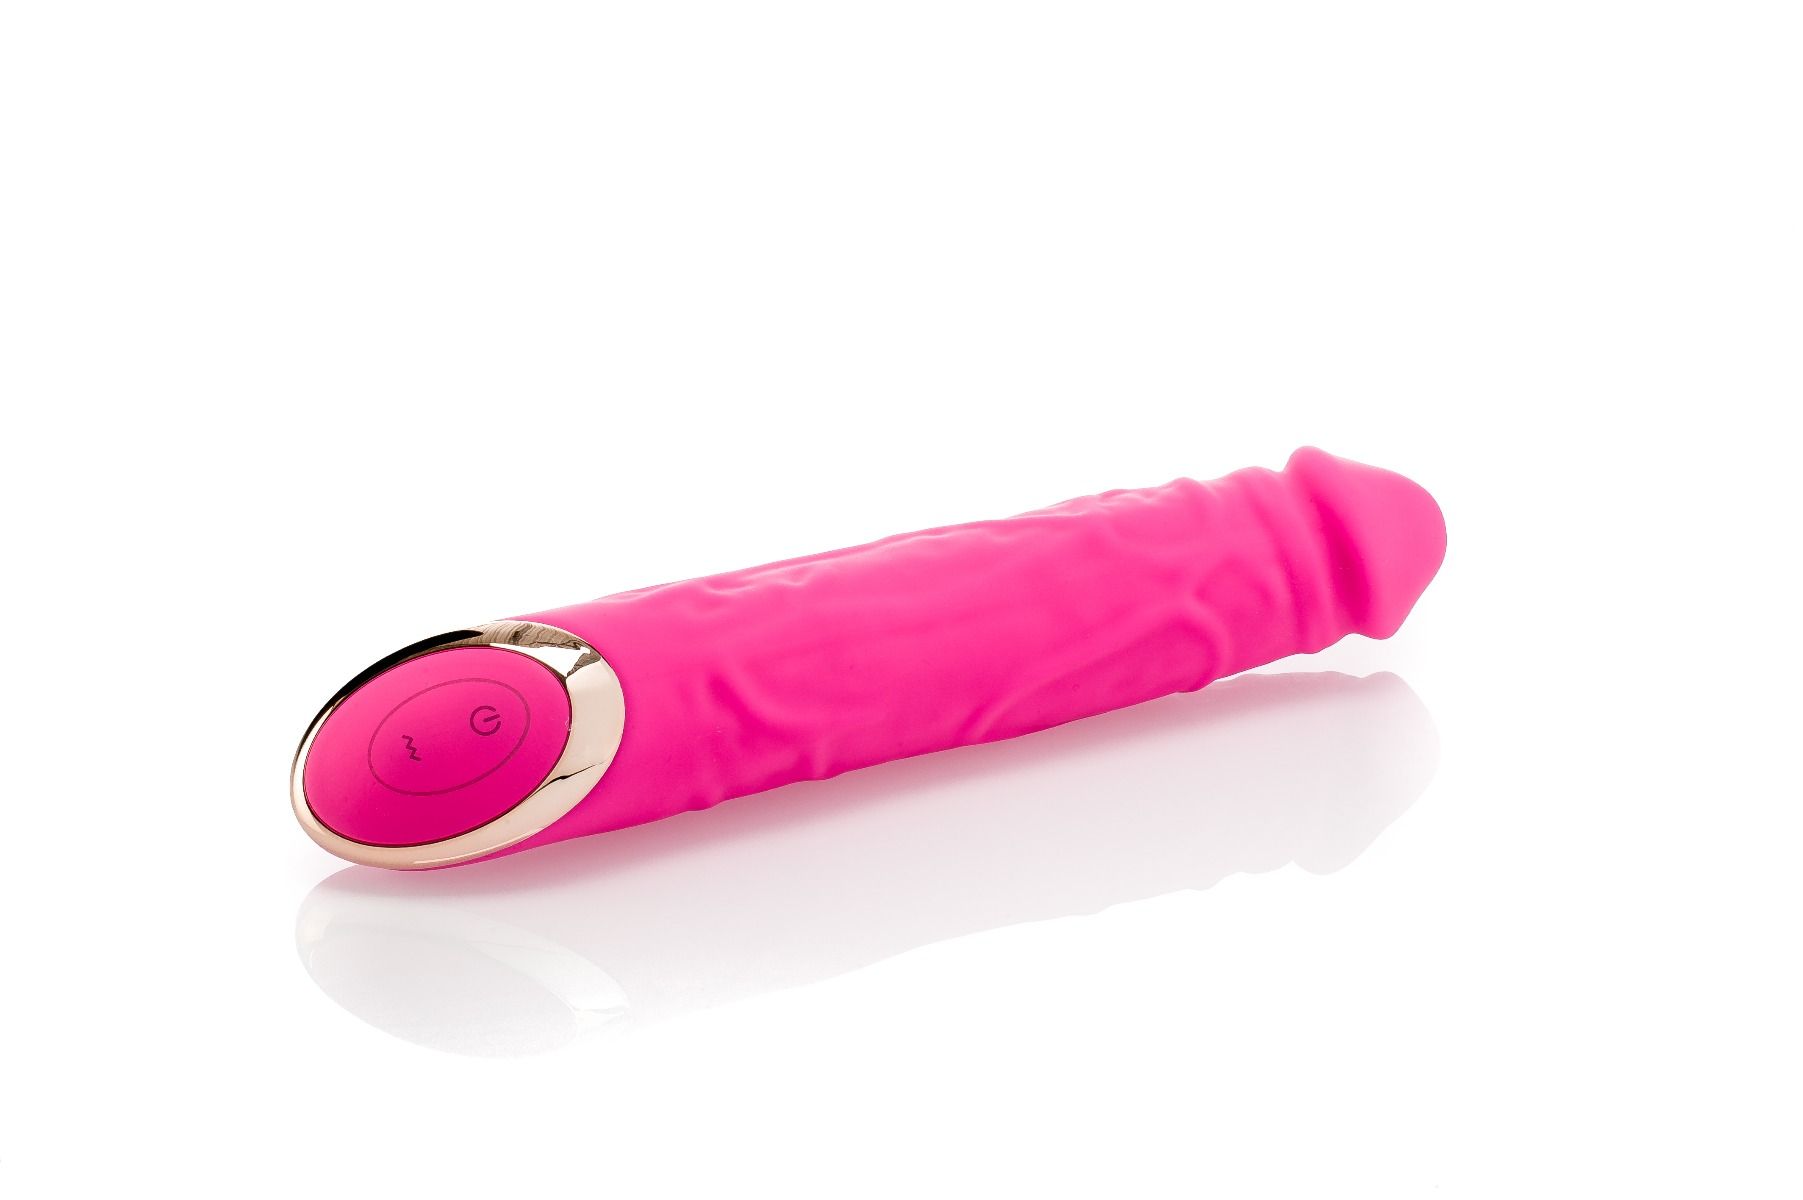 The Pink Realistic Vibo